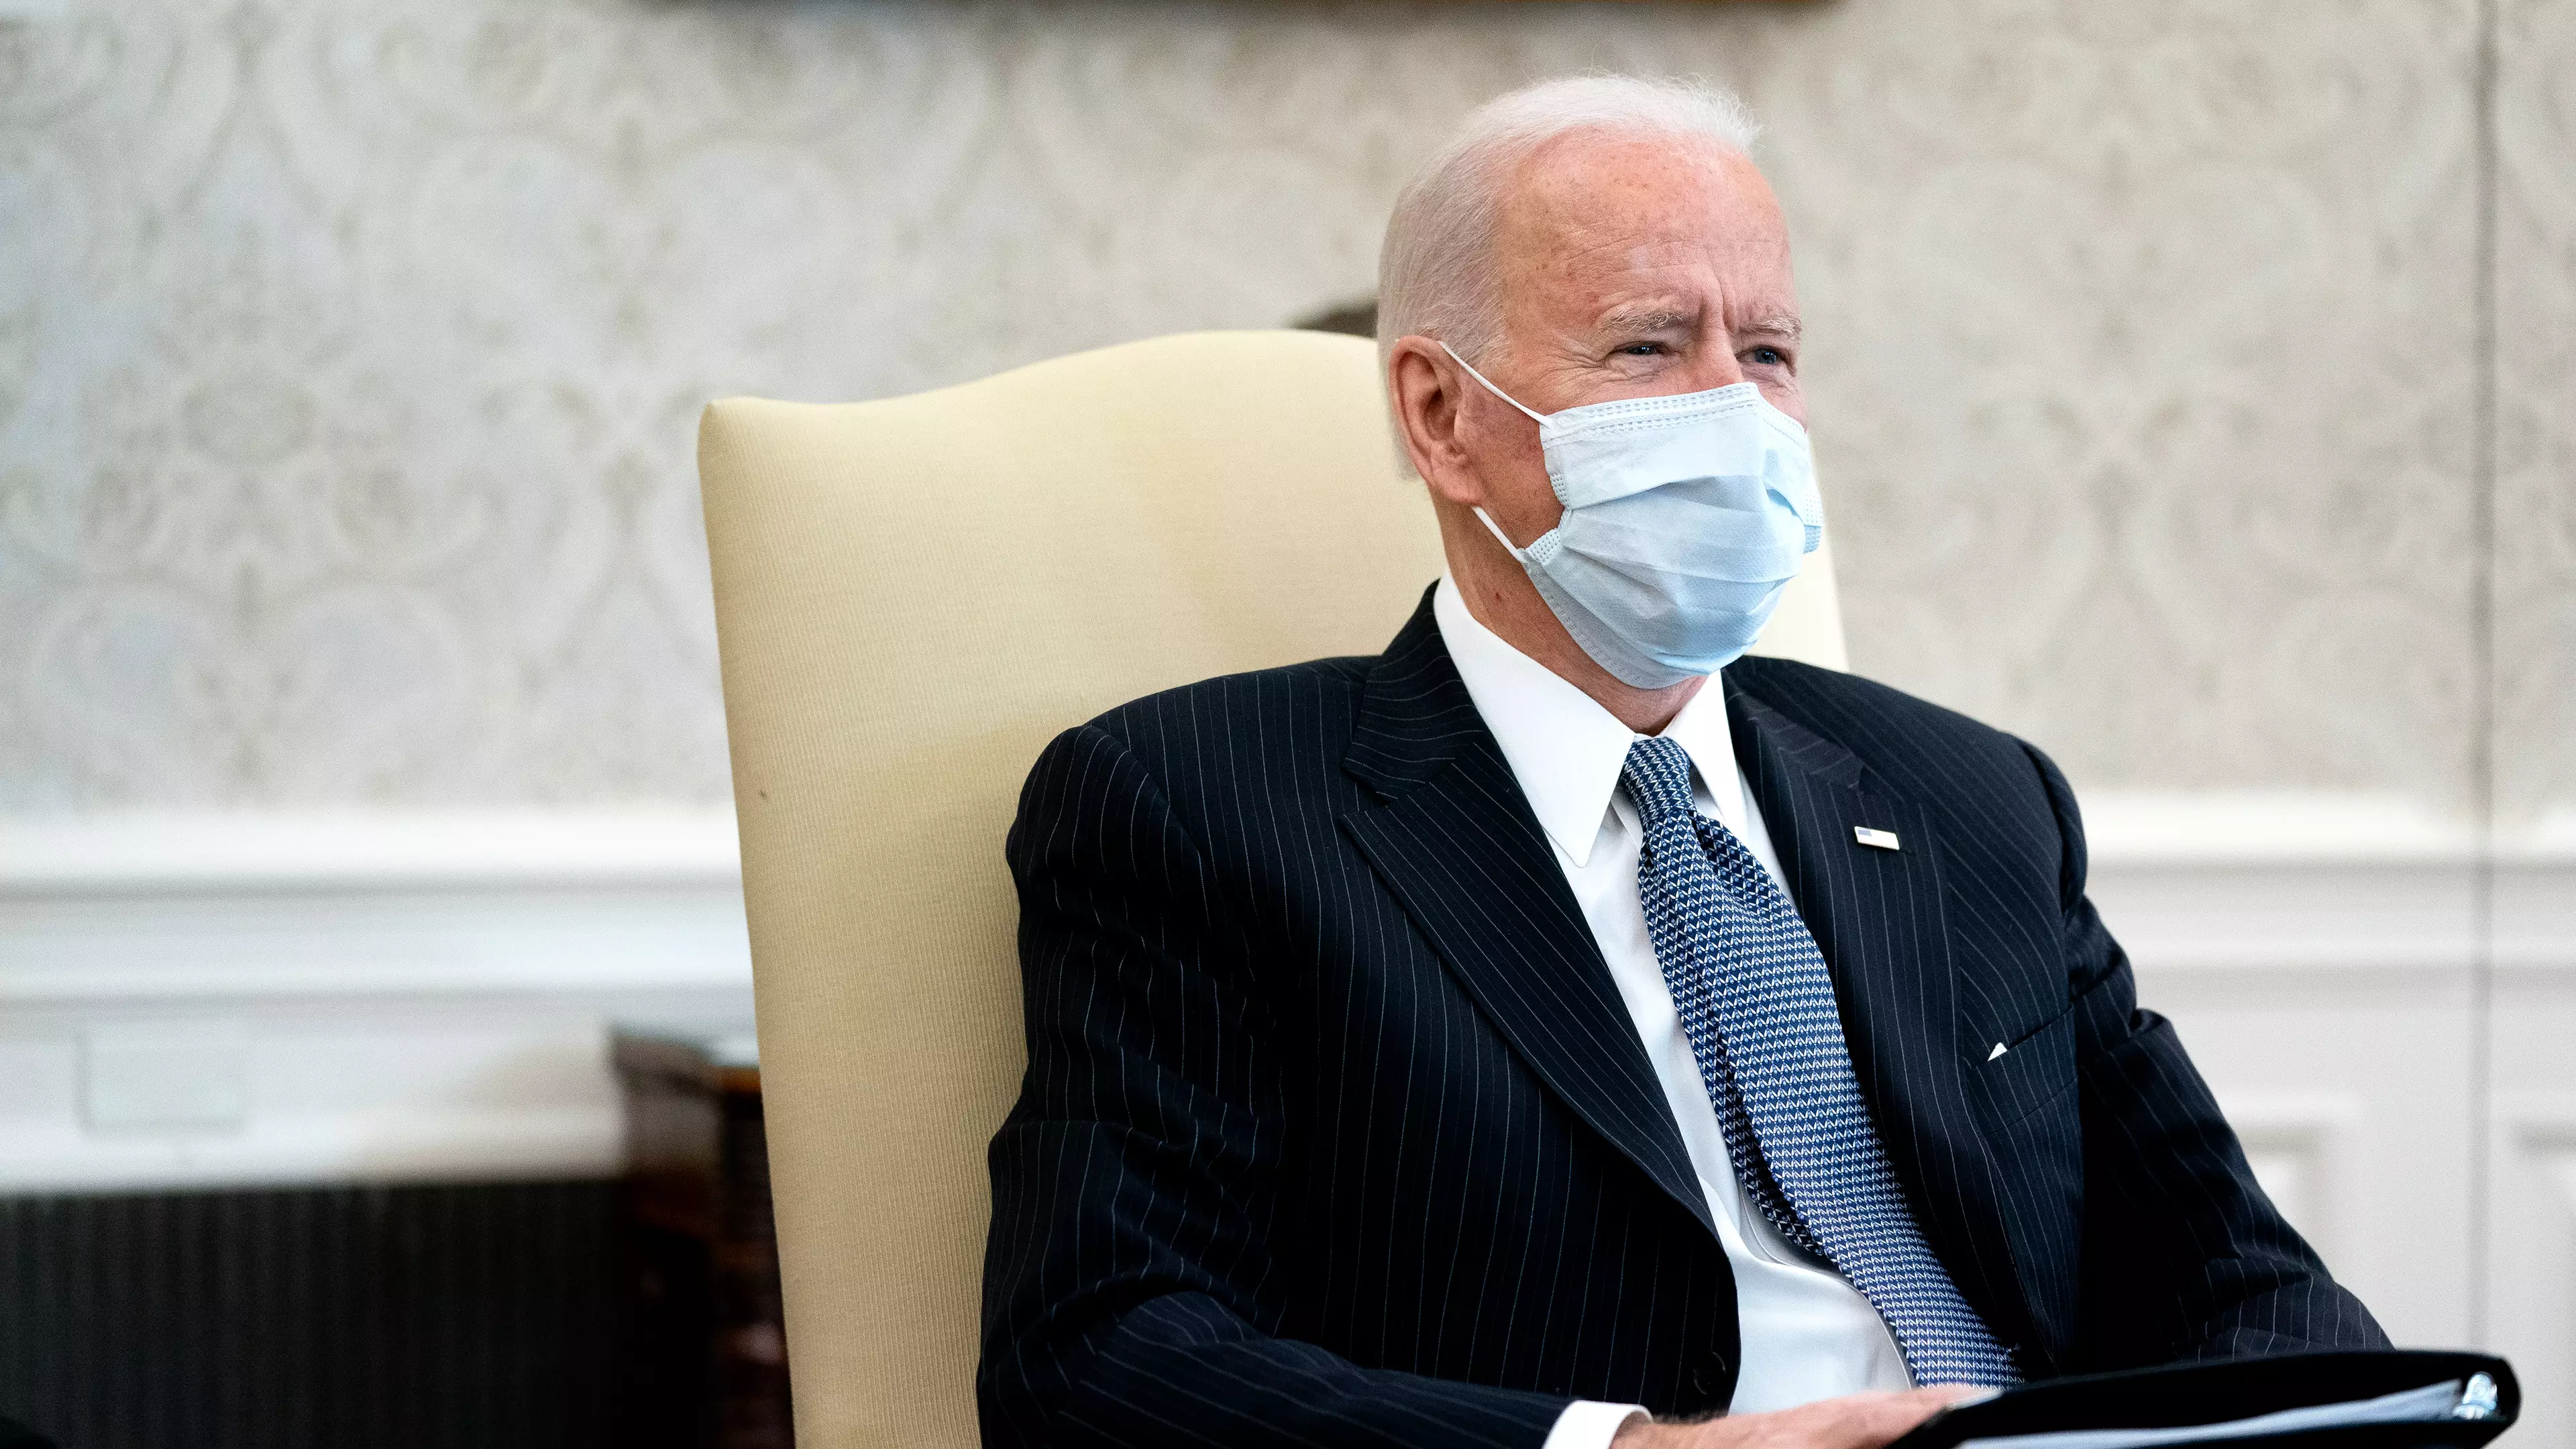 Joe Biden Wants To Send Face Masks To Every American Household